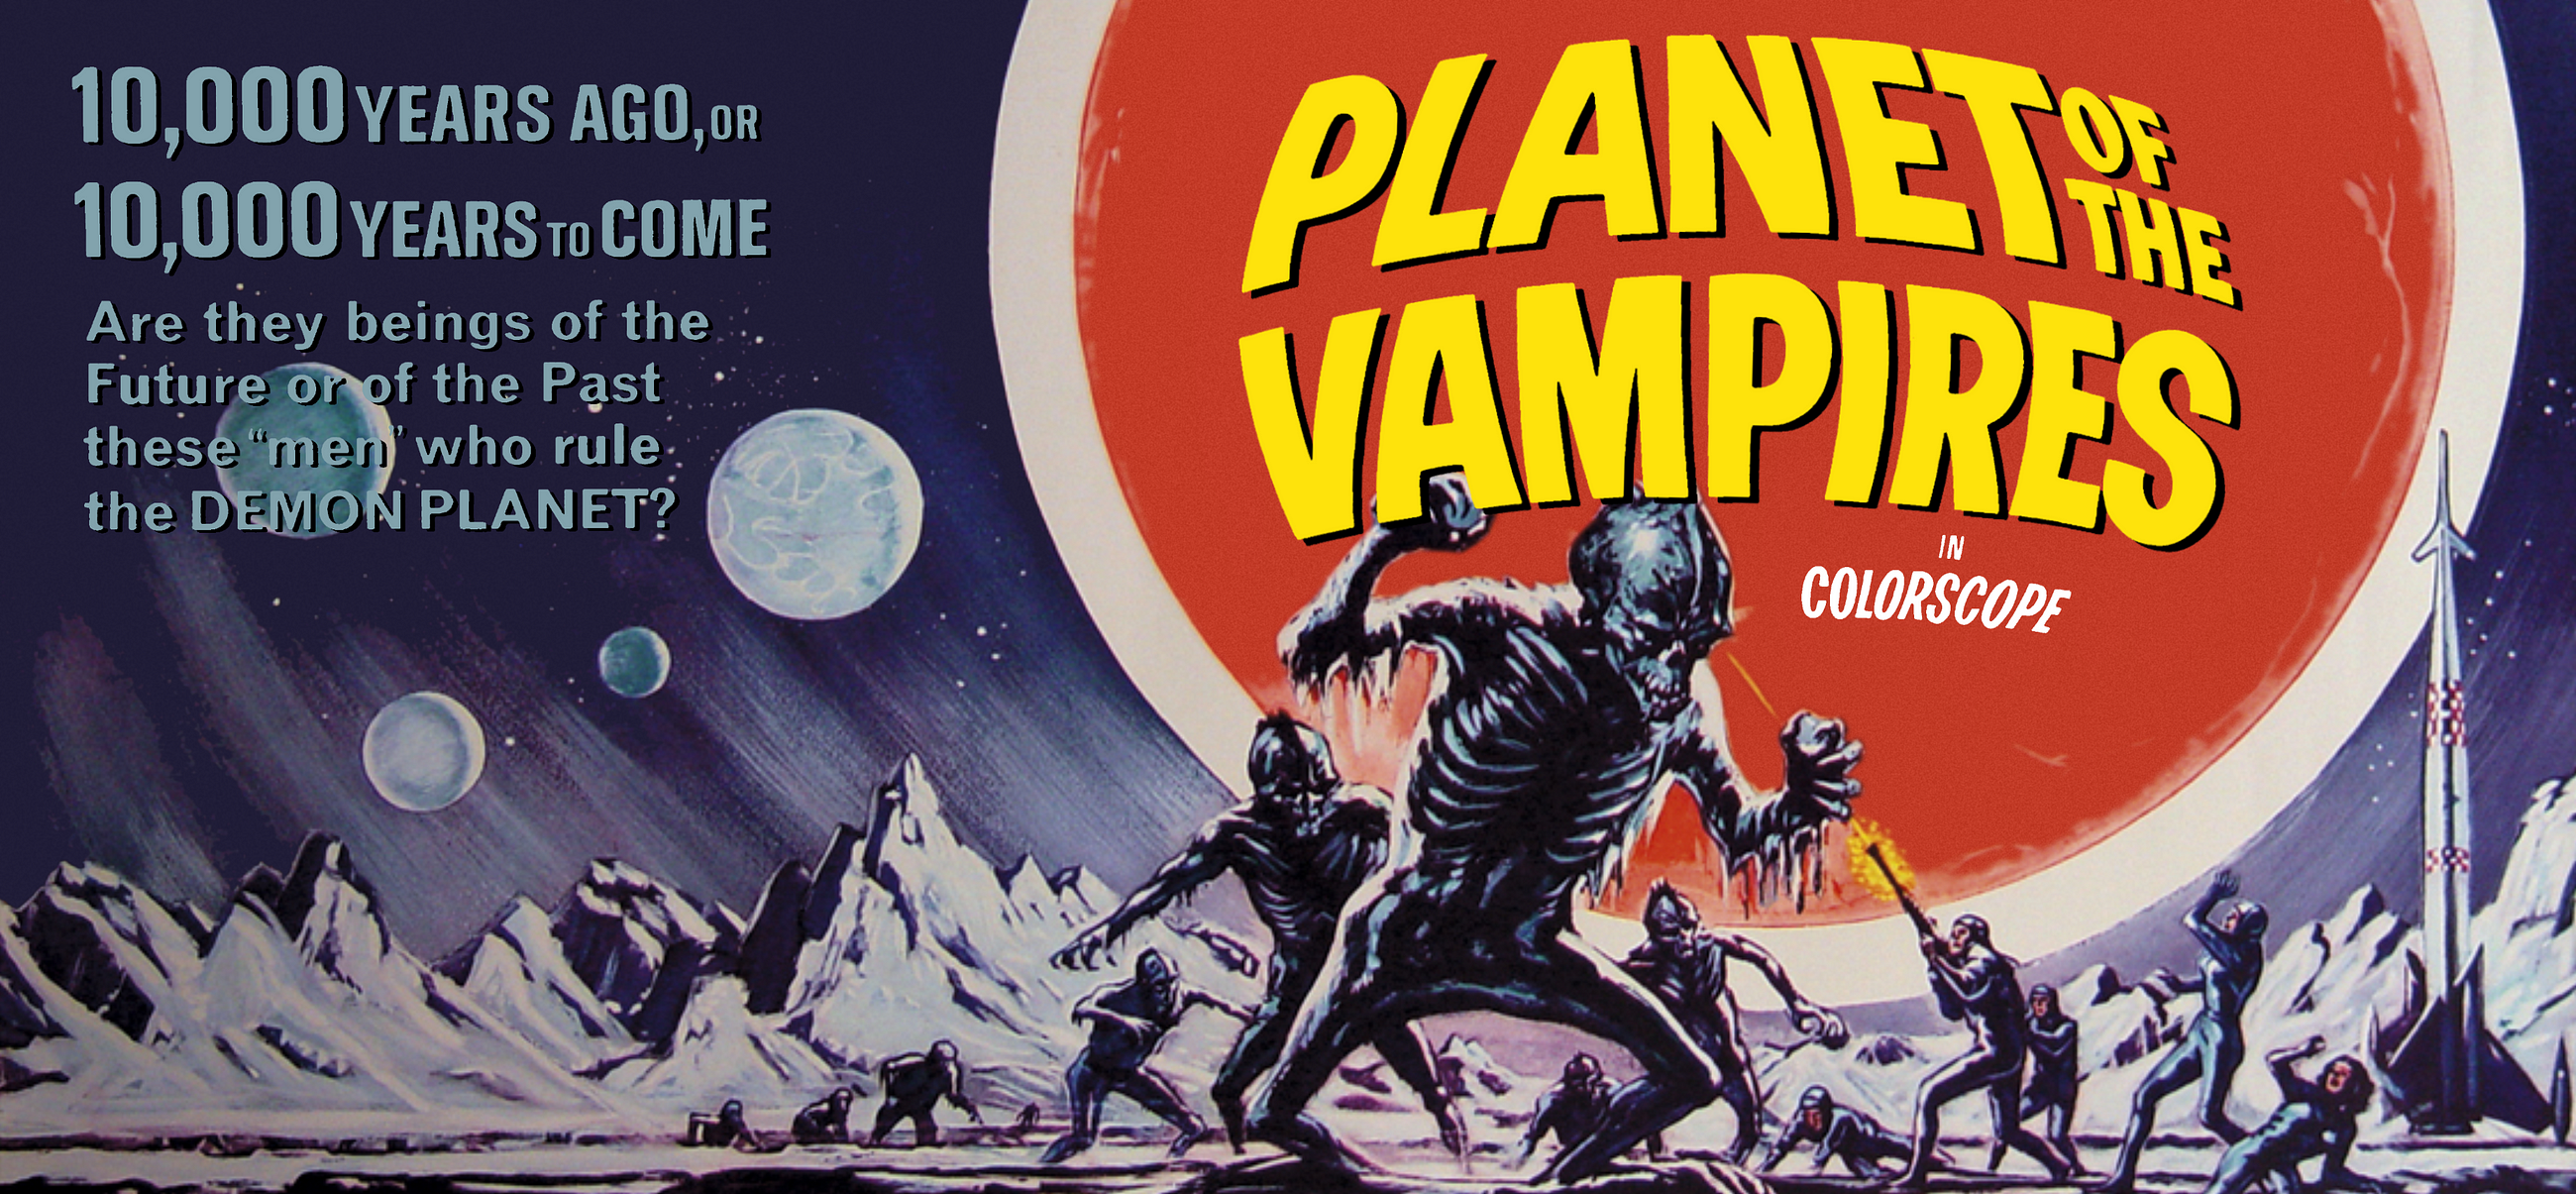 My Favourite Underrated Sci-Fi Film: Planet of the Vampires